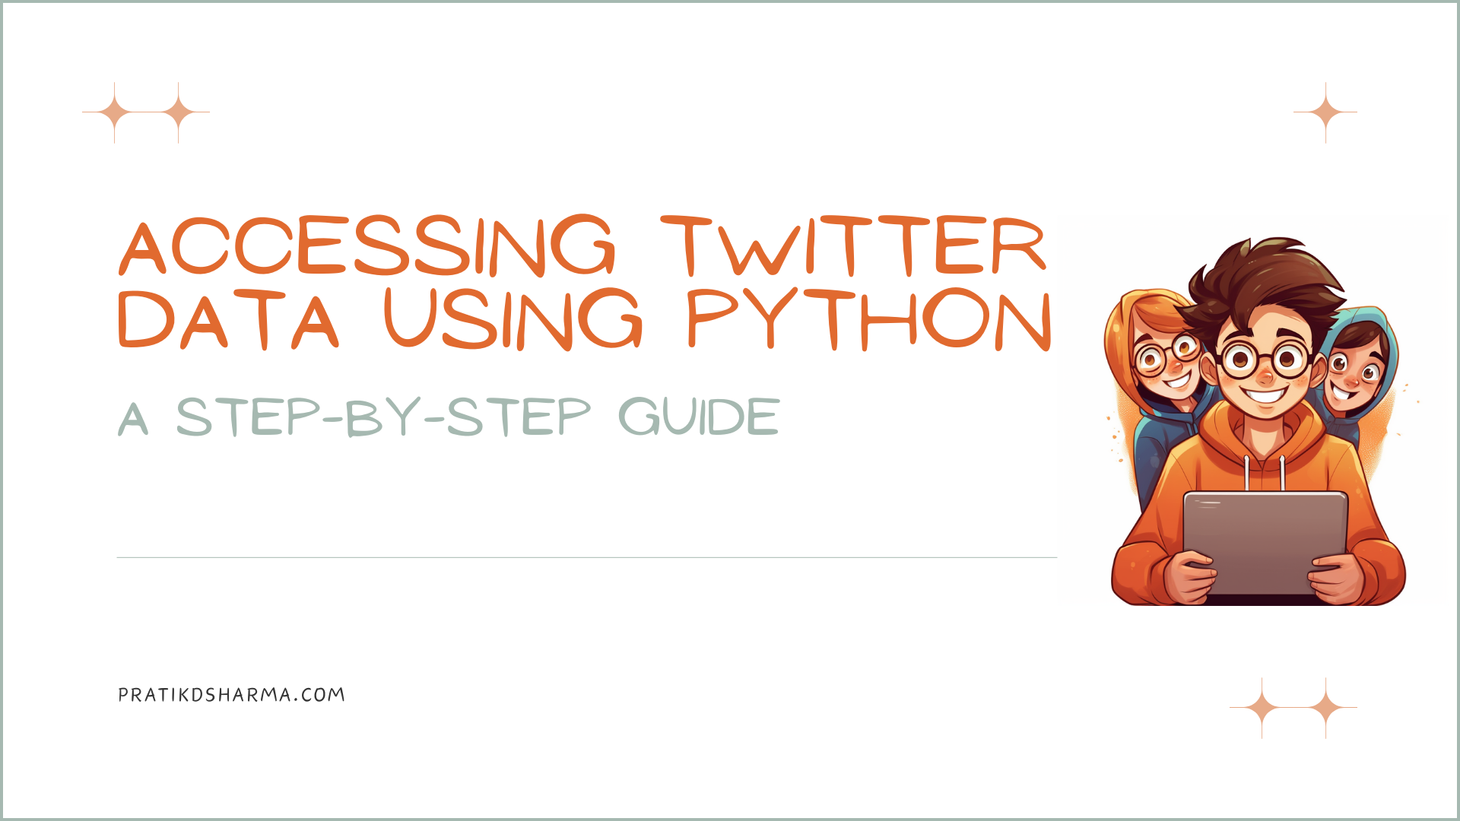 Step-by-Step Guide: How to Access Twitter Data using Python.